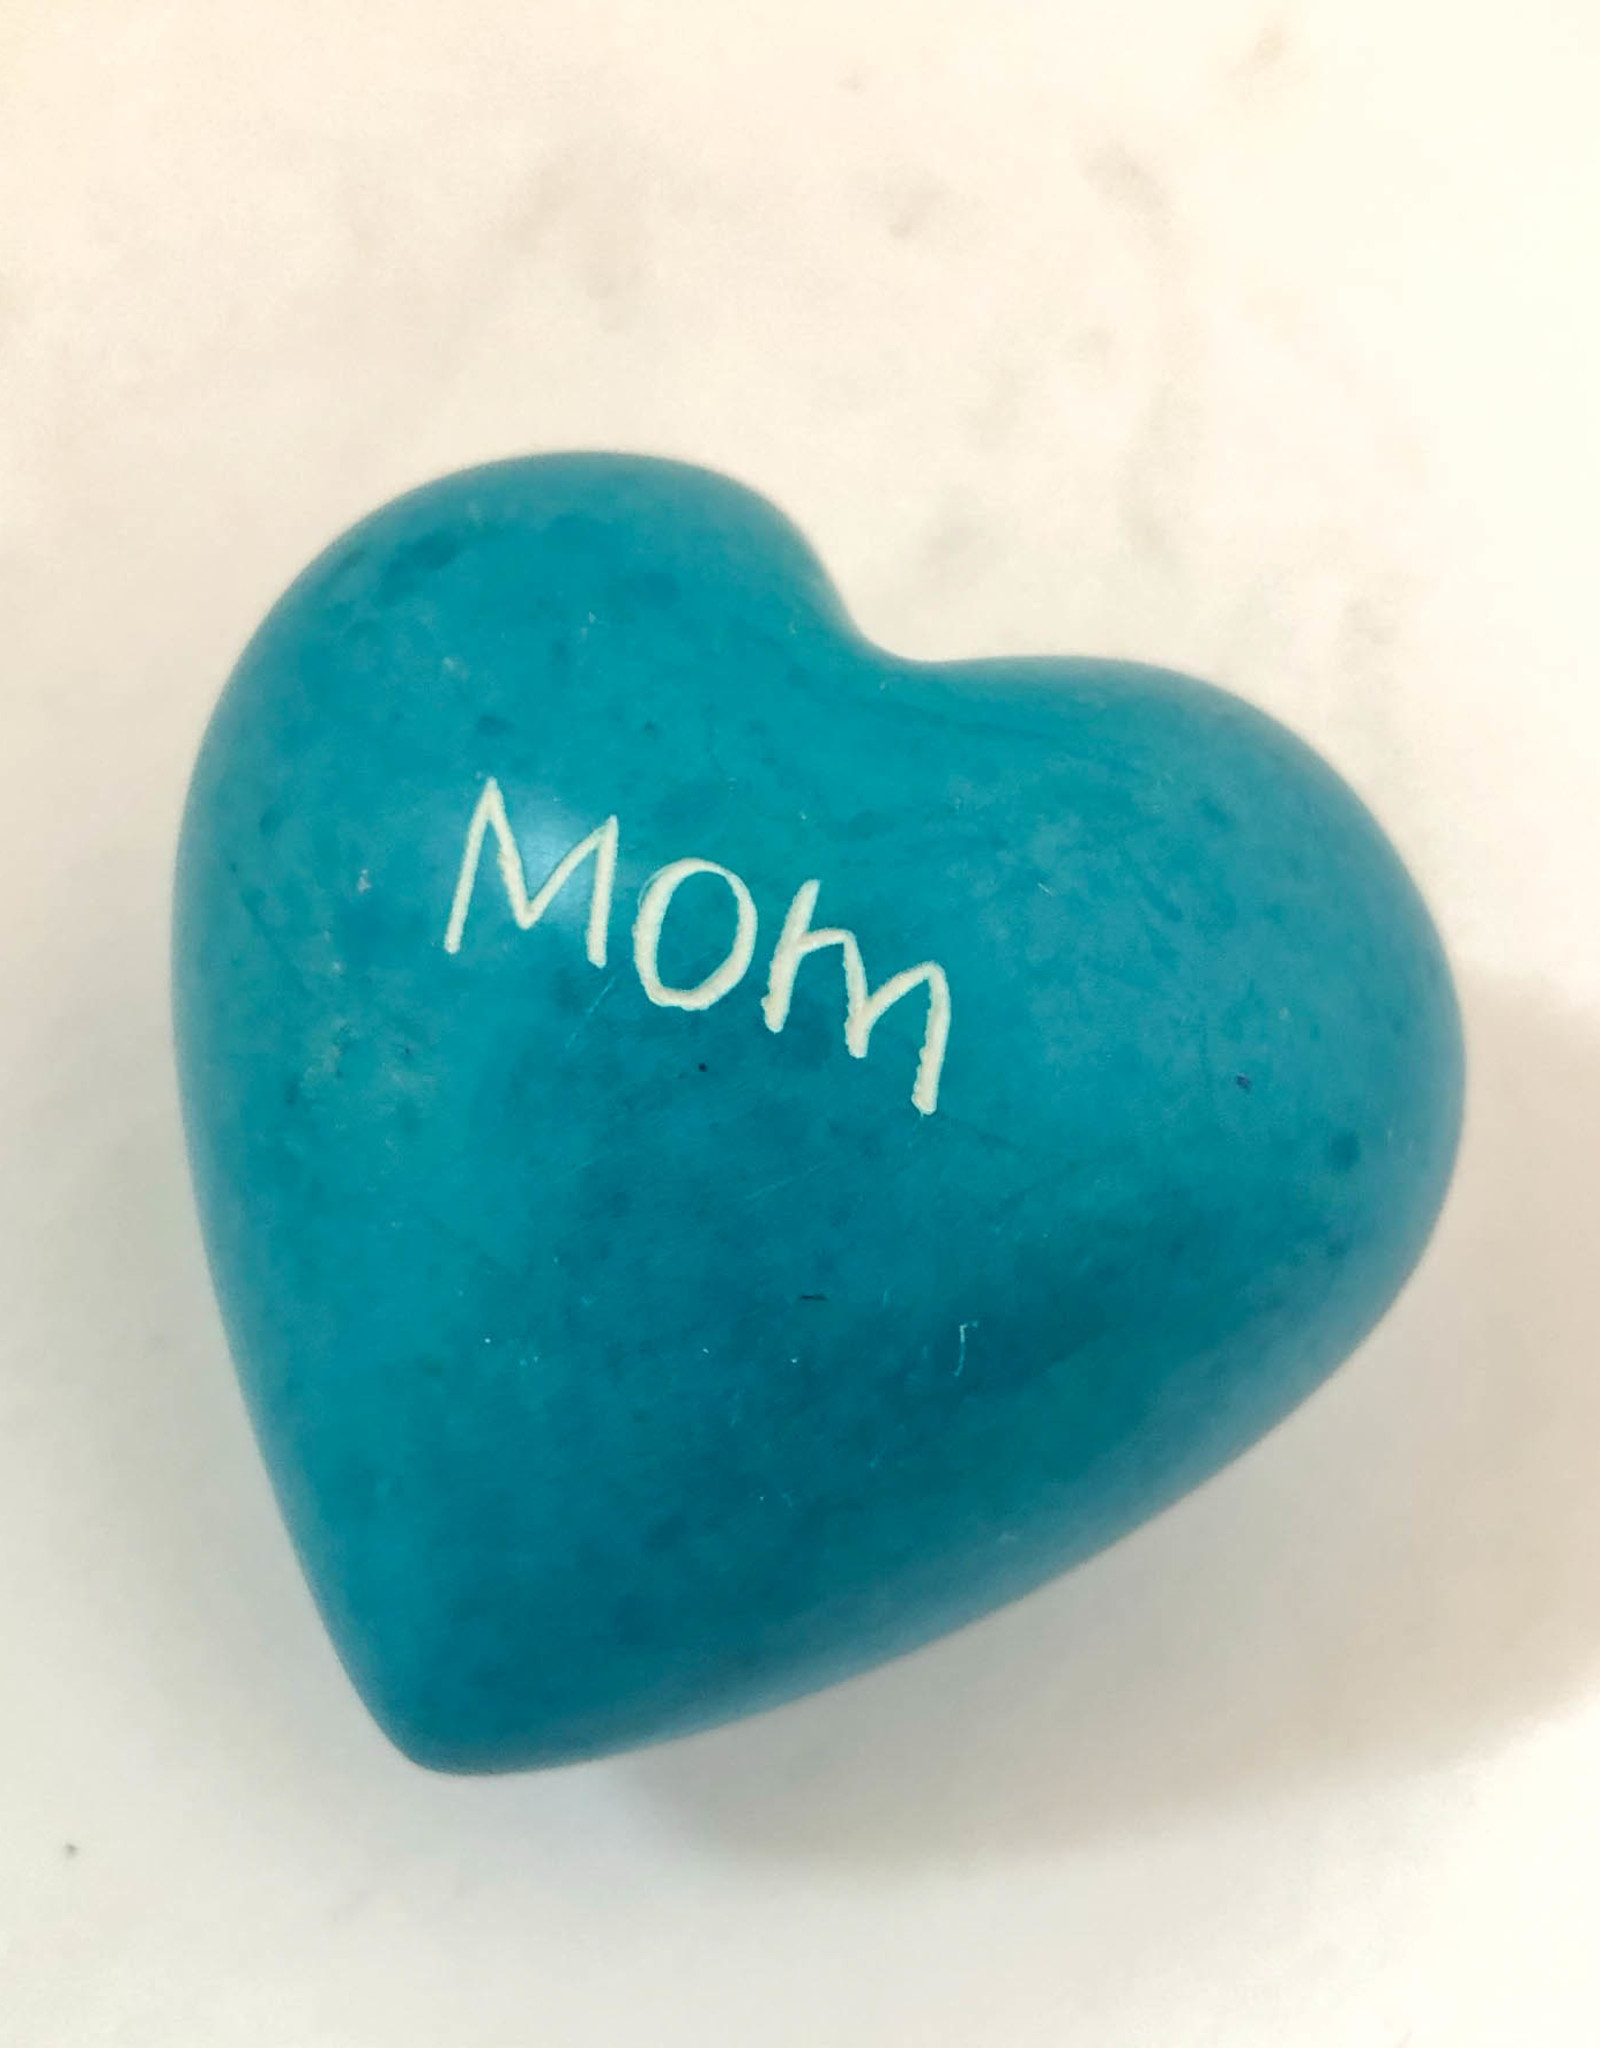 Venture Imports Word Hearts - Love You/Mom